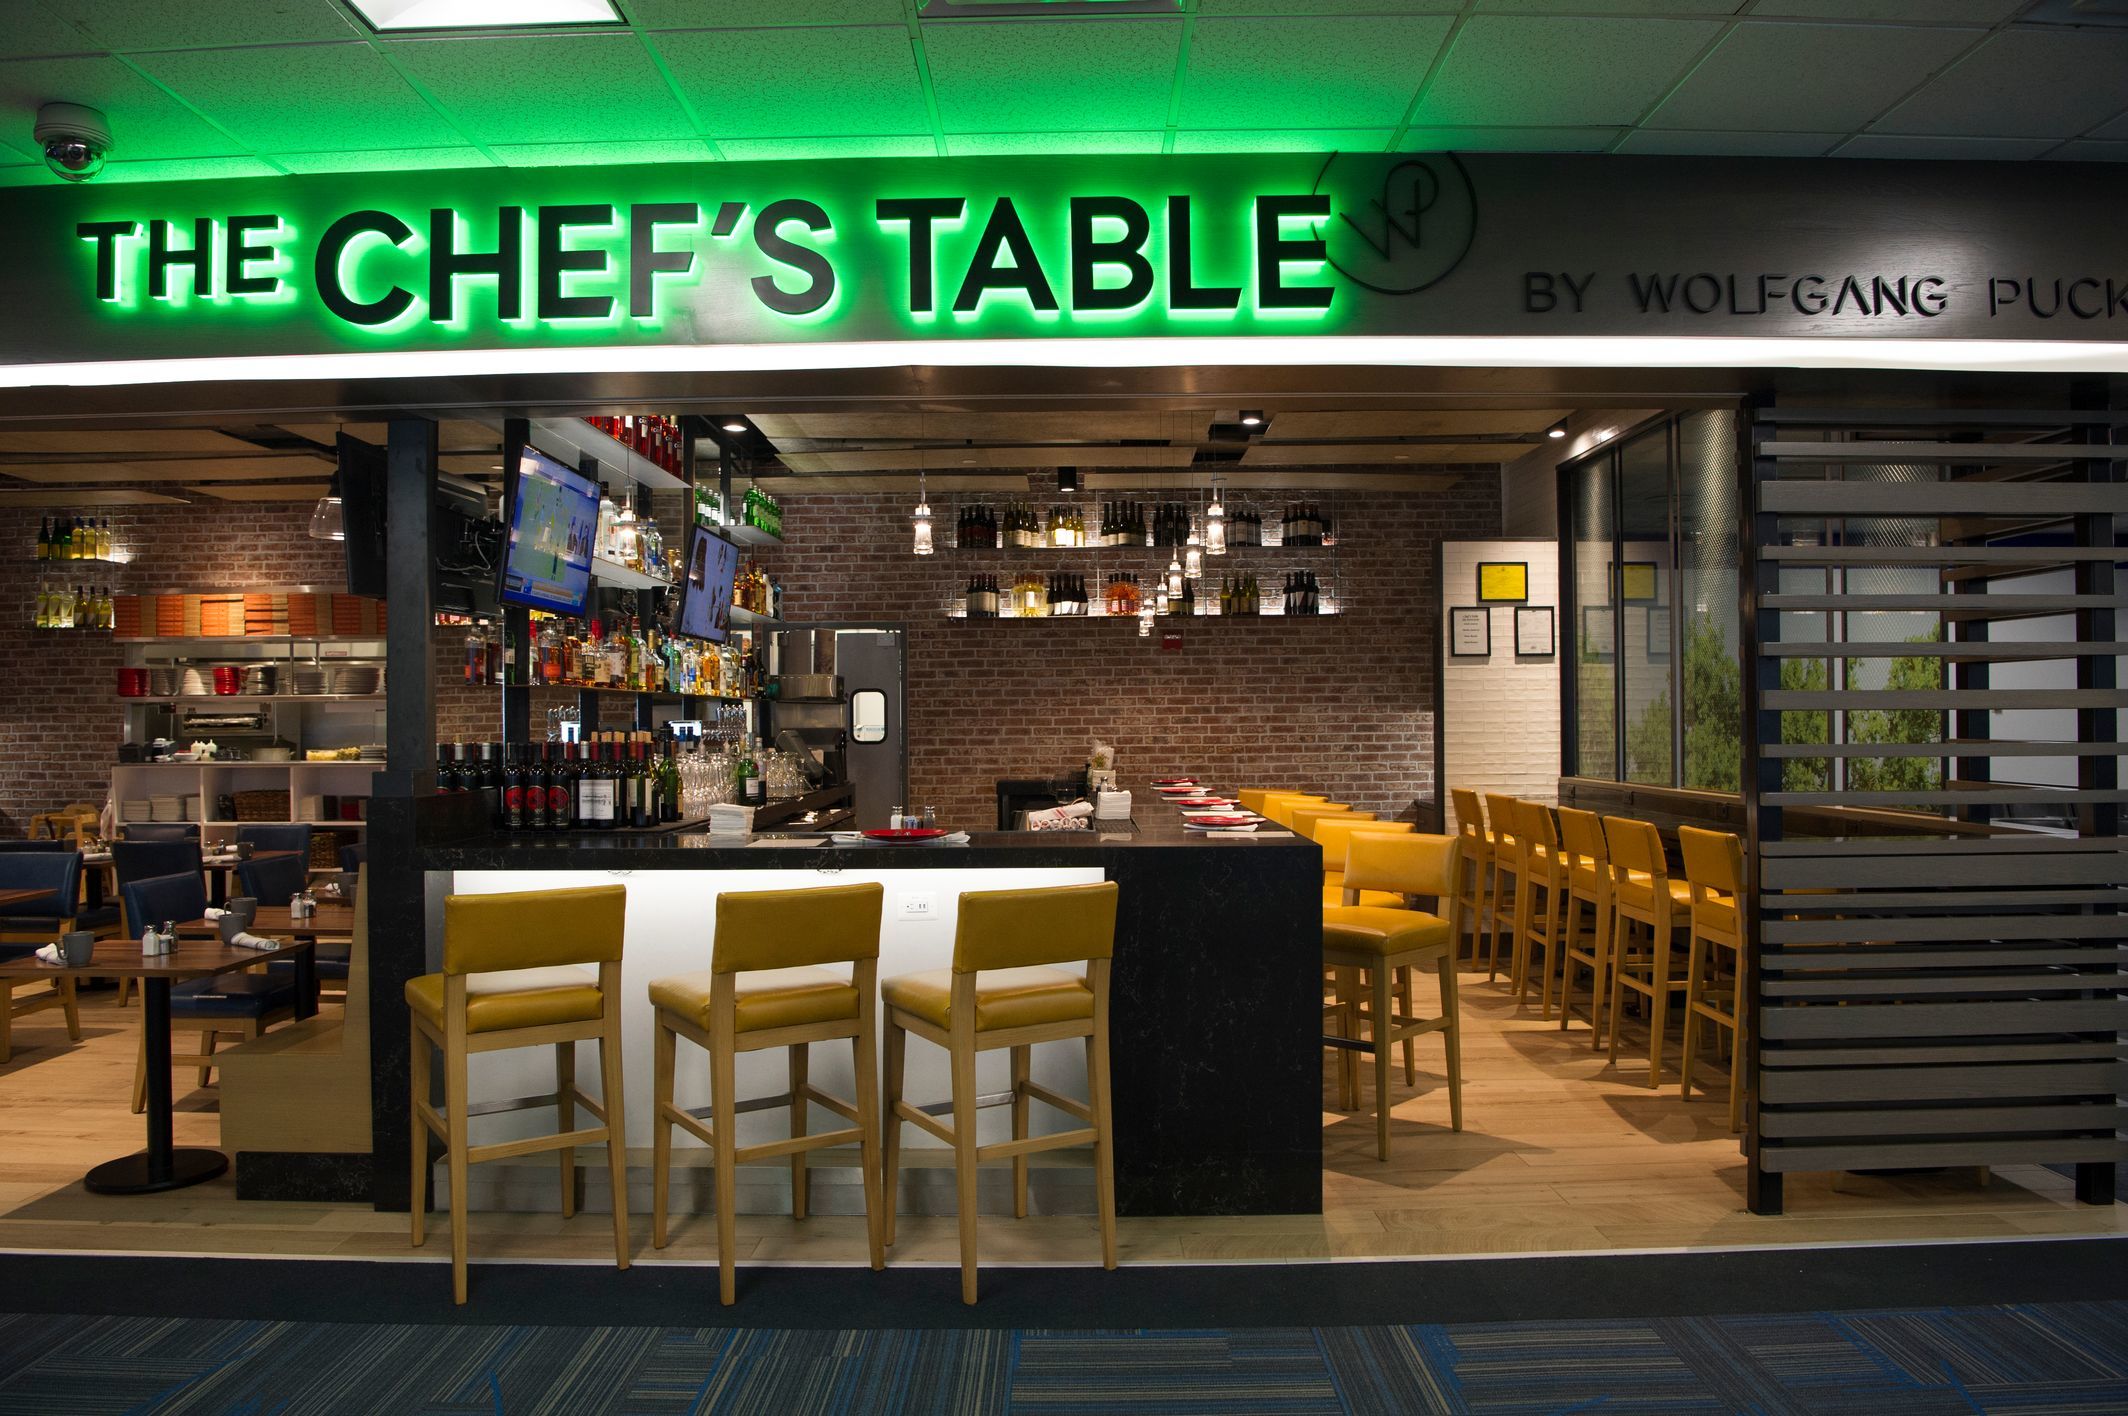 Photo of Chef’s Table by Wolfgang Puck, Dulles, VA